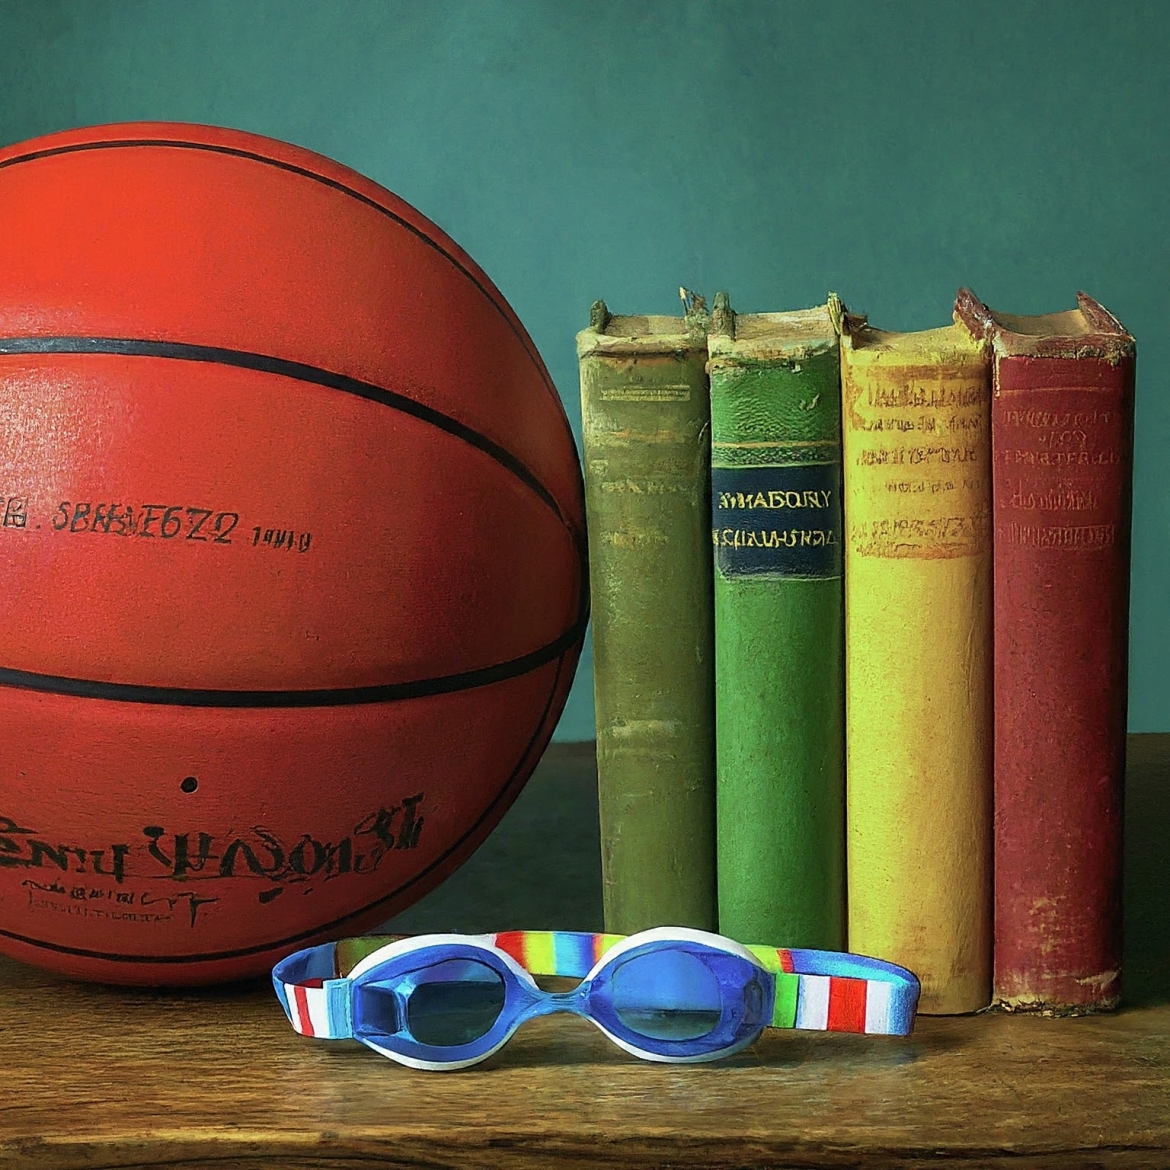 A stack of books, a basketball, and a pair of swim goggles.